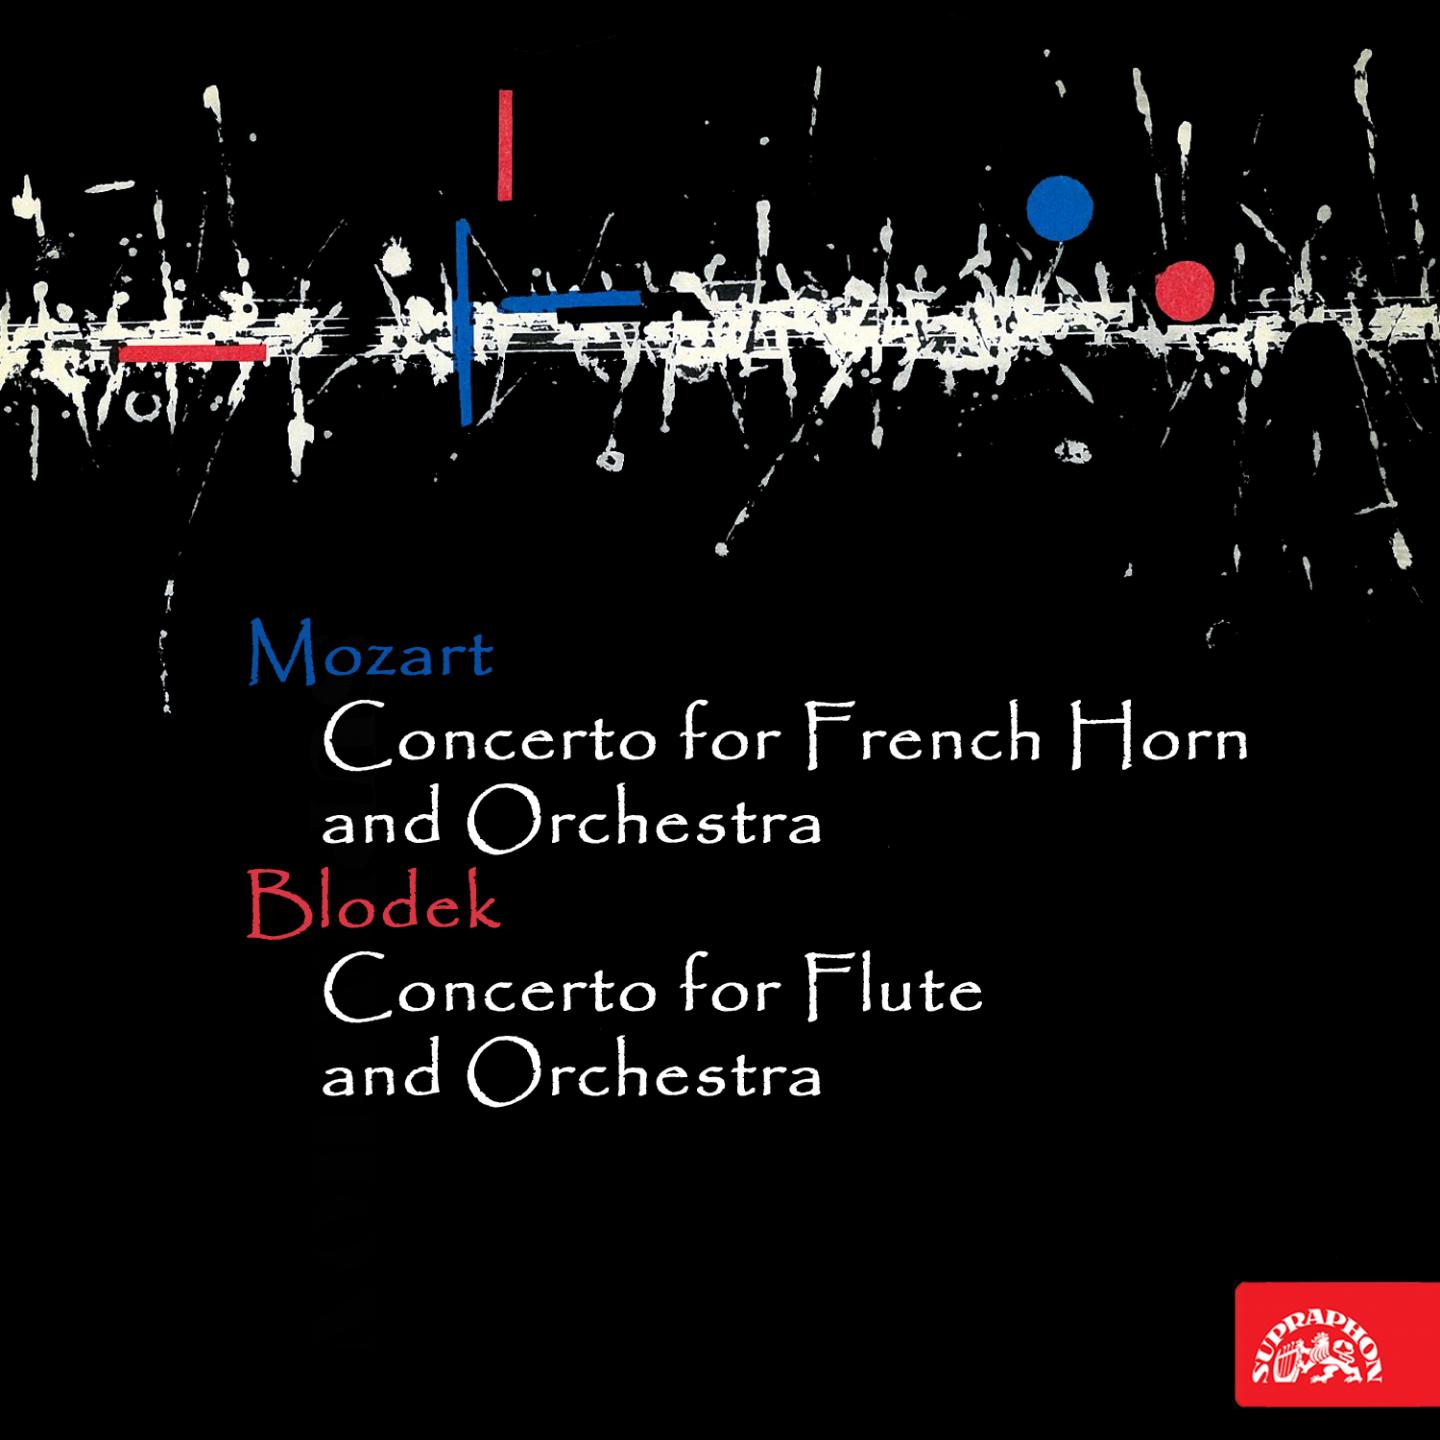 Concerto No. 2 for French Horn and Orchestra in E-Flat Major, .: II. Andante